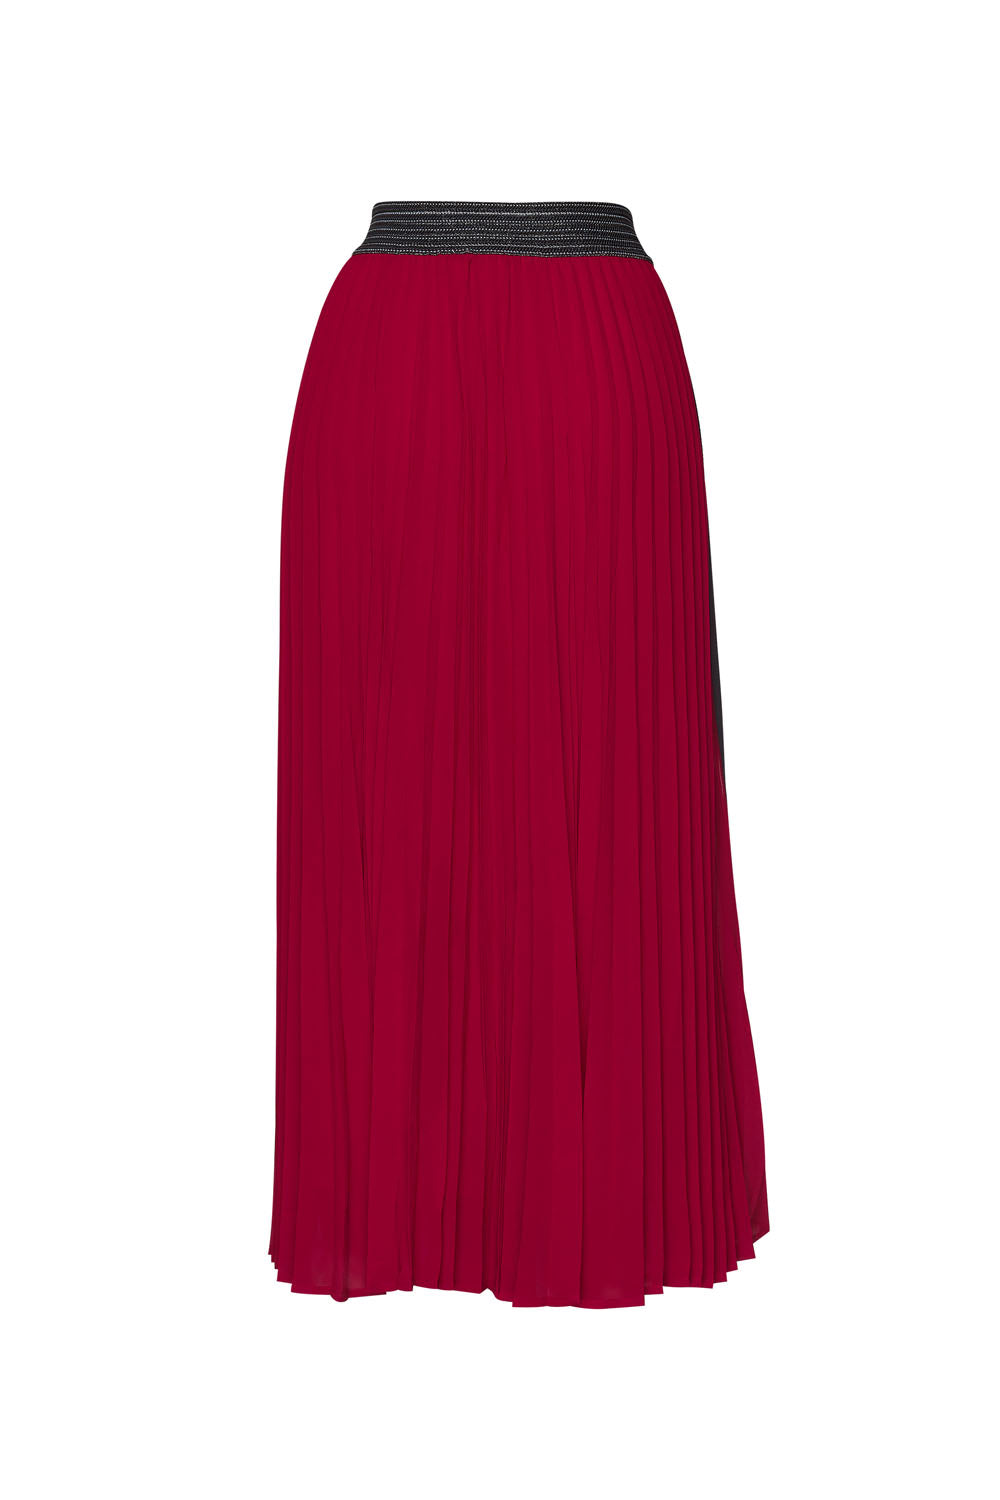 MADLY SWEETLY JUST PLEAT IT SKIRT - SCARLET - THE VOGUE STORE